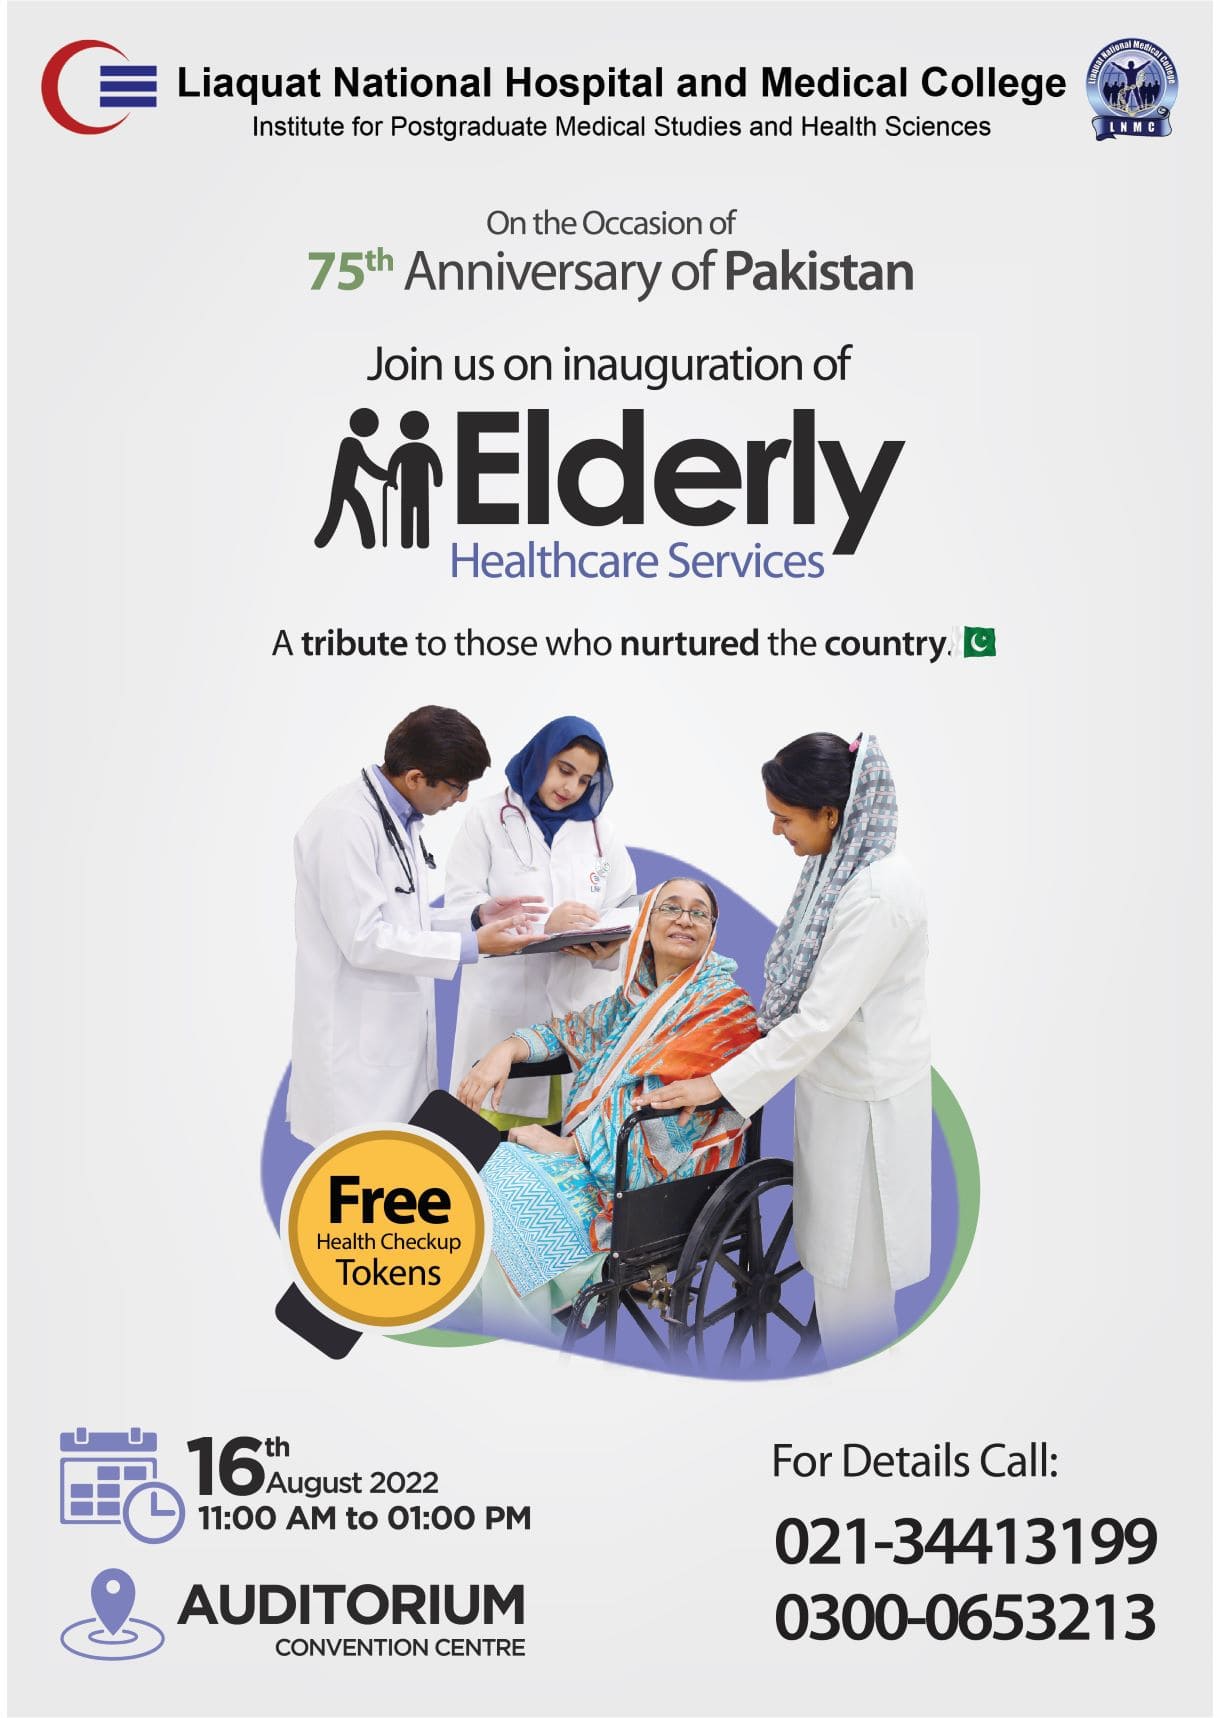 Join us on Inauguration of Elderly Healthcare Services